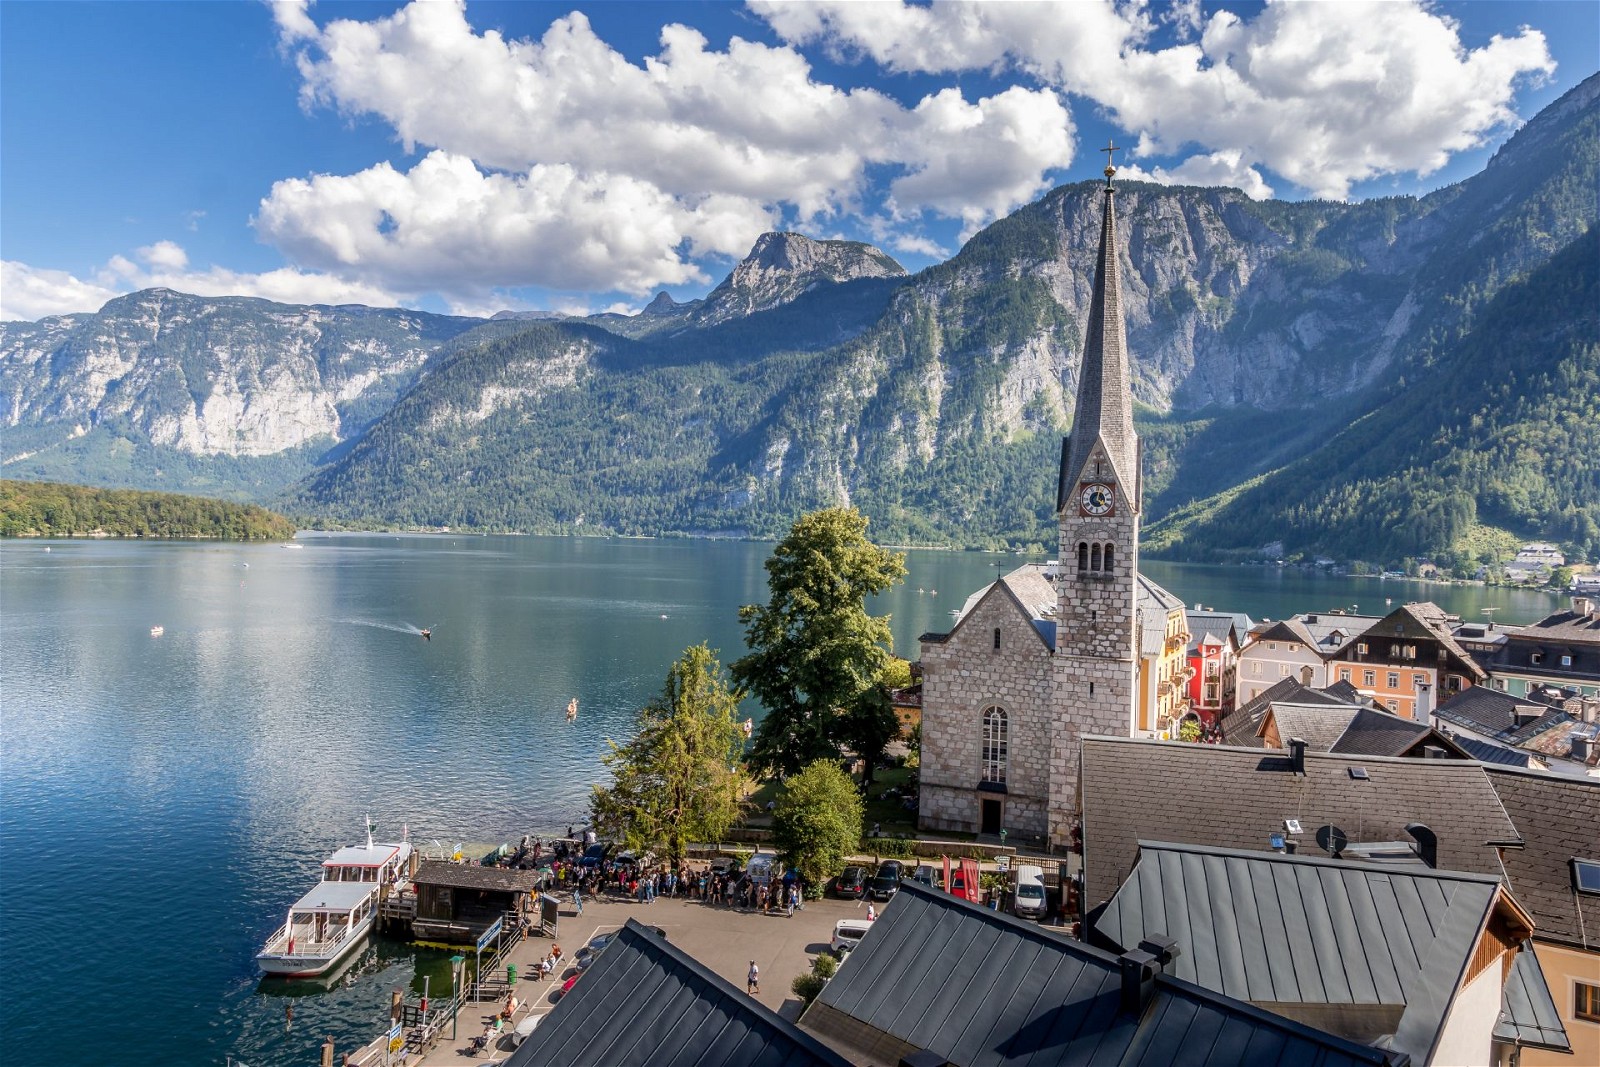 Hallstatt is a small village located in Austria, famous for its history, natural beauty, and enchanting landscapes